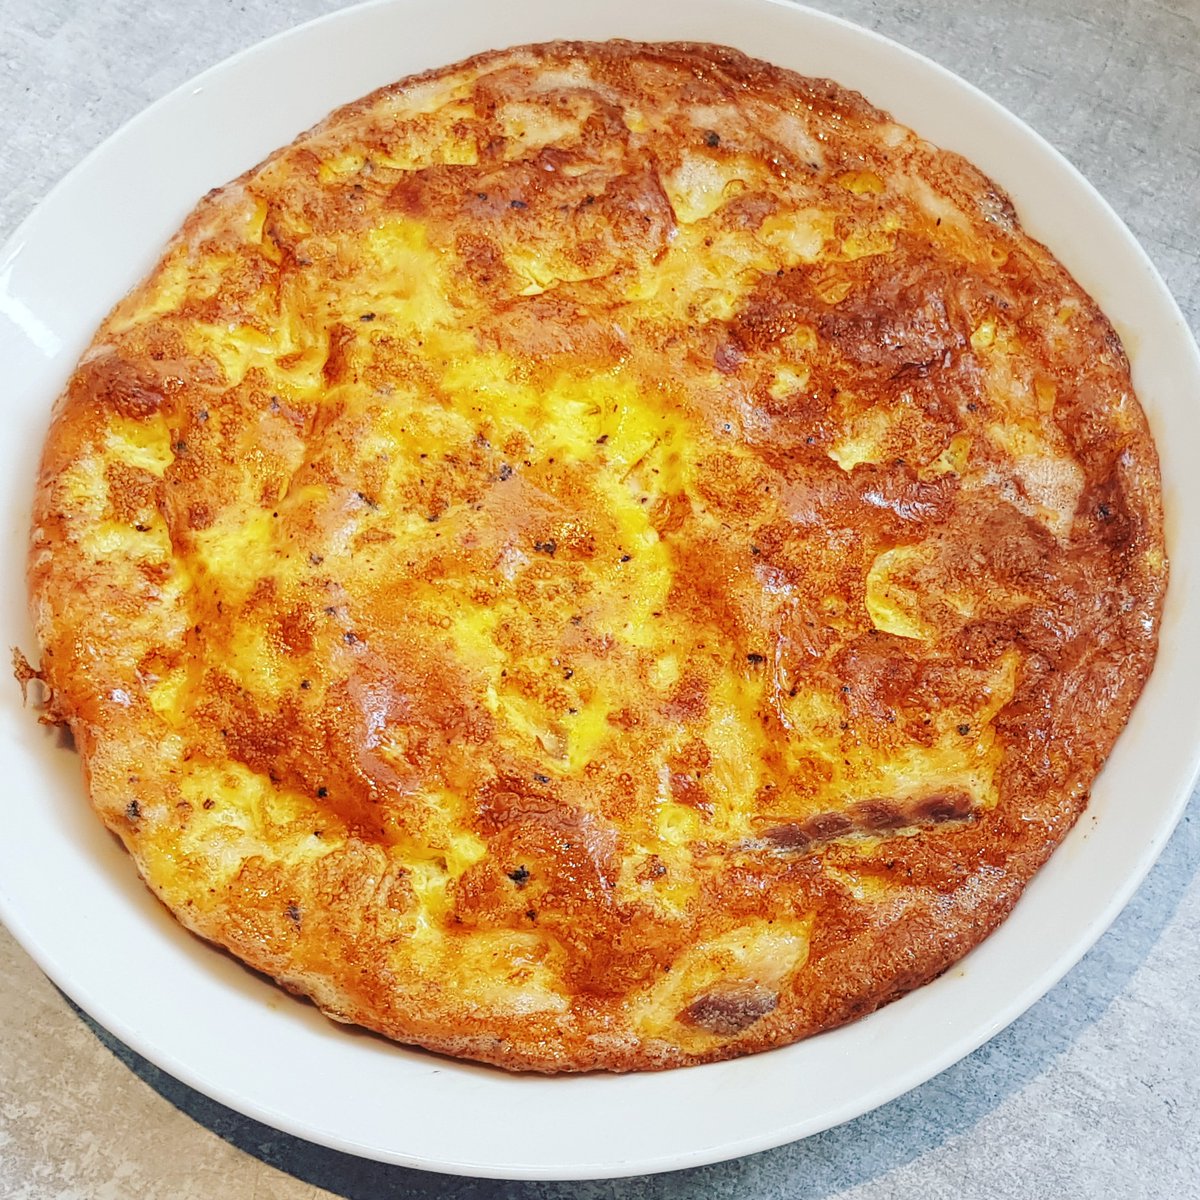 Hot smoked salmon frittata for lunch